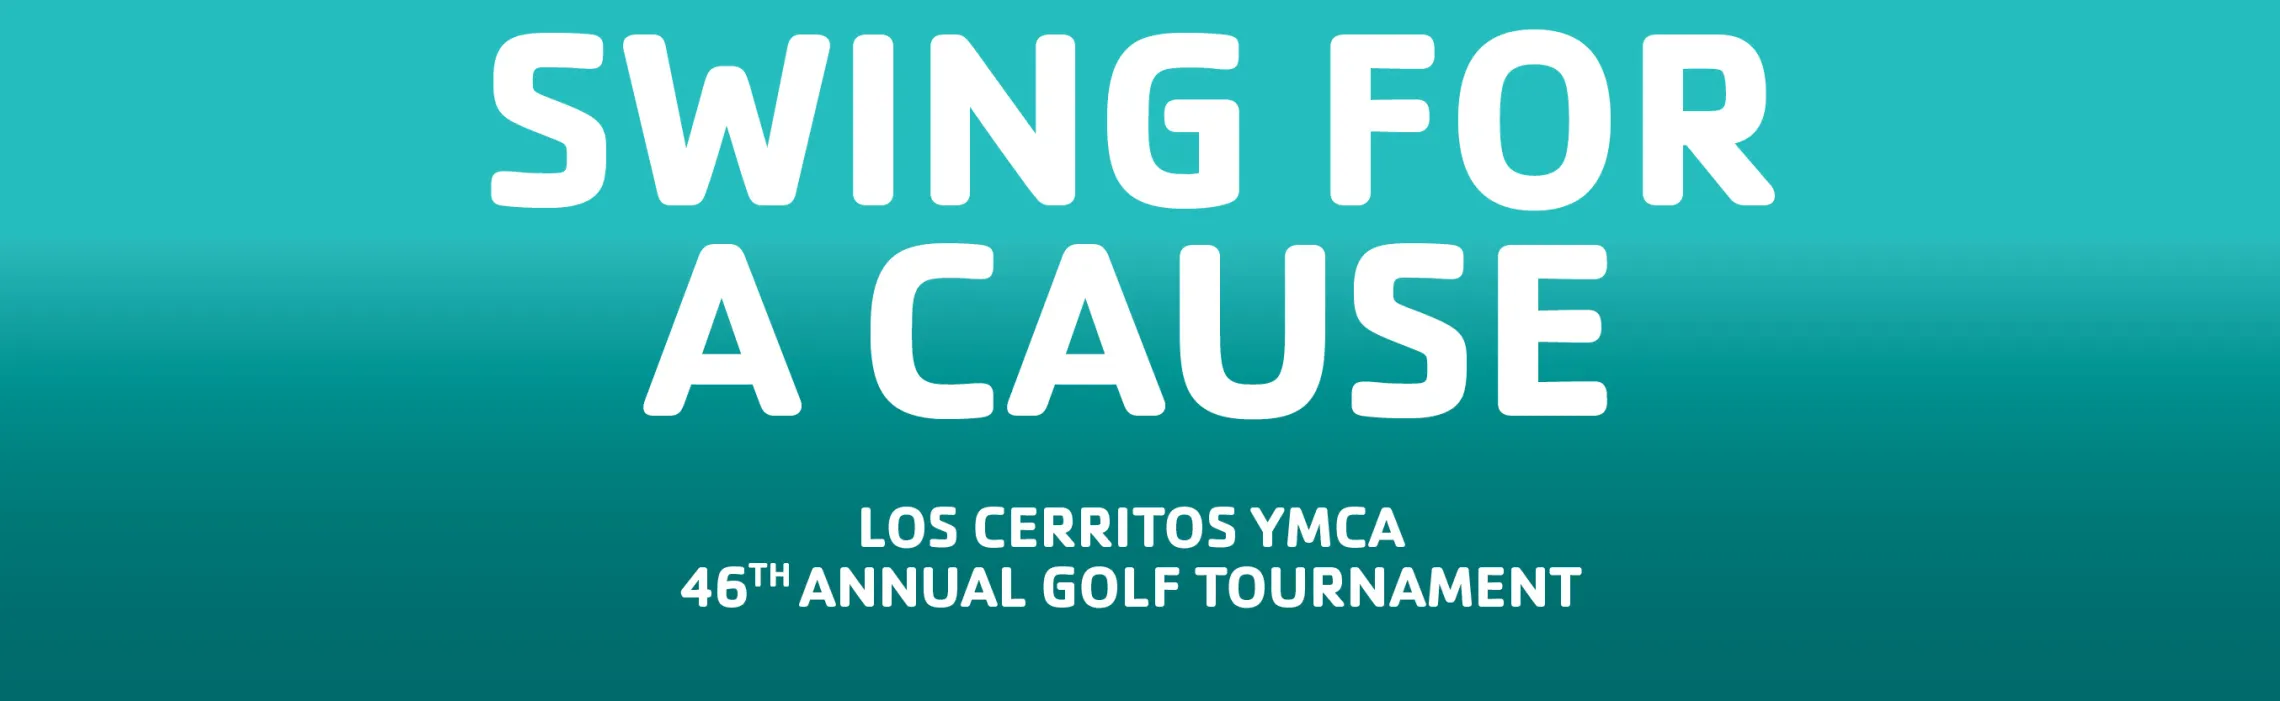 SWING FOR A CAUSE